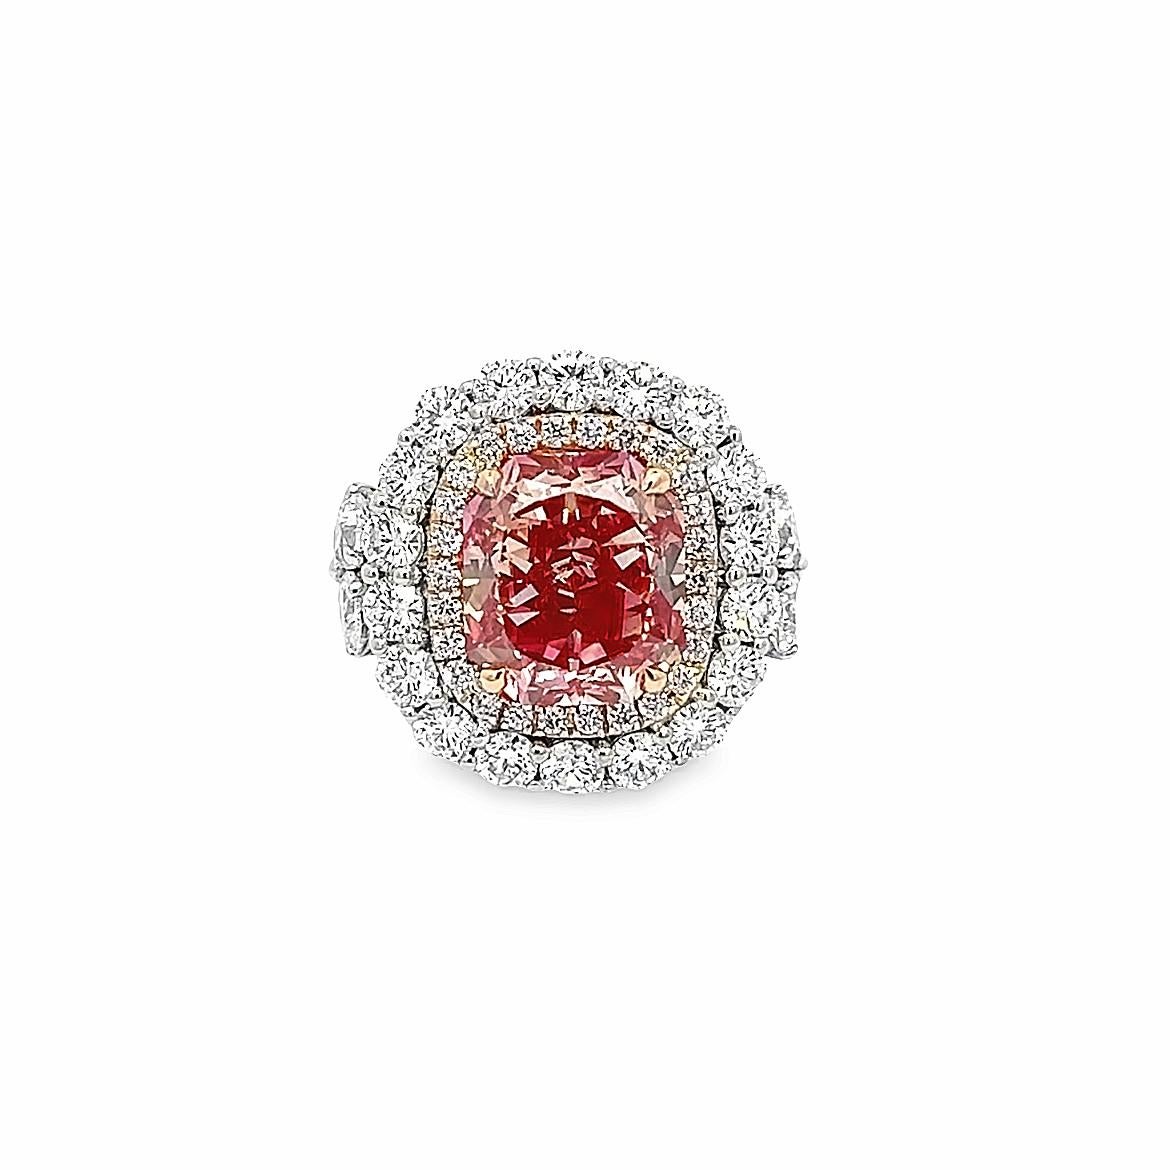 Aesthetic Movement 11.31CT Total Weight Fancy Vivid Pink Diamond Ring, GIA Certified For Sale